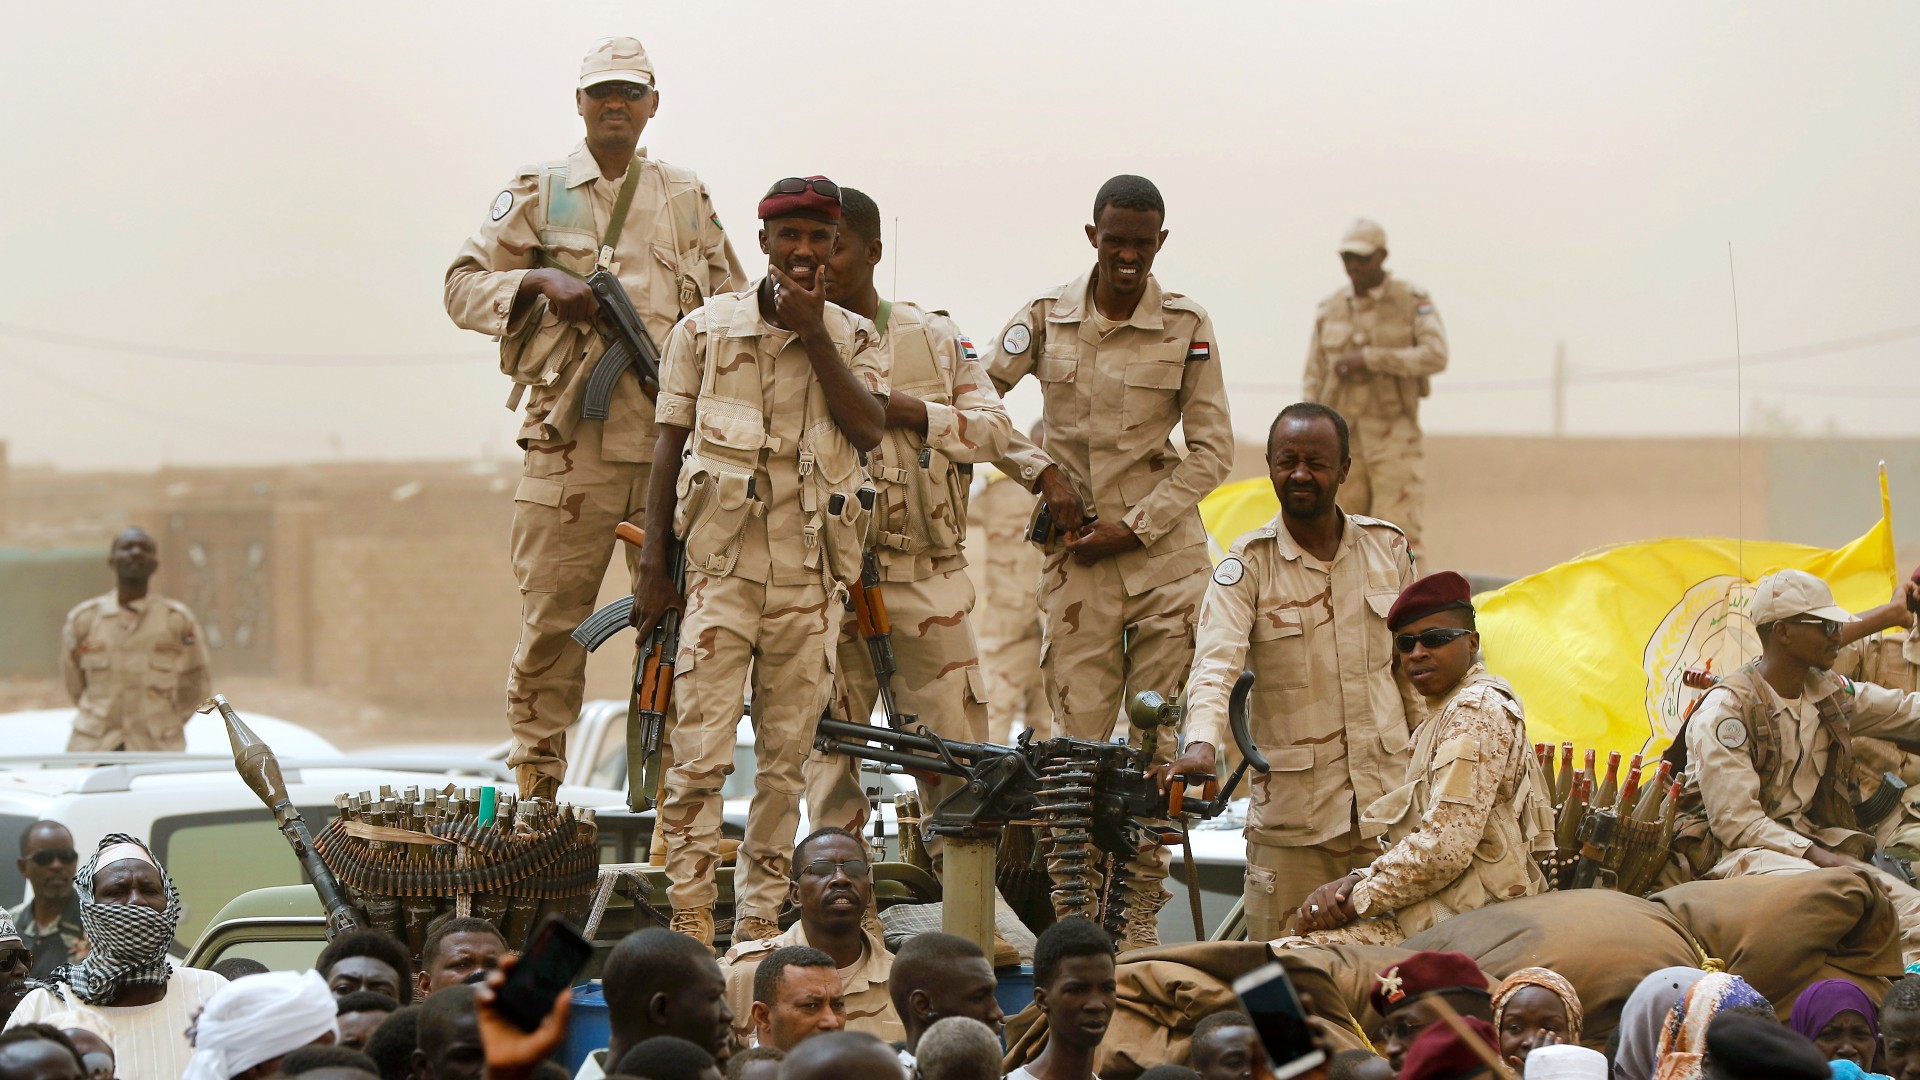 Fighters from the Rapid Support Forces unit stand on their vehicle during a rally, in Mayo district, south of Khartoum on 29 June (AP)